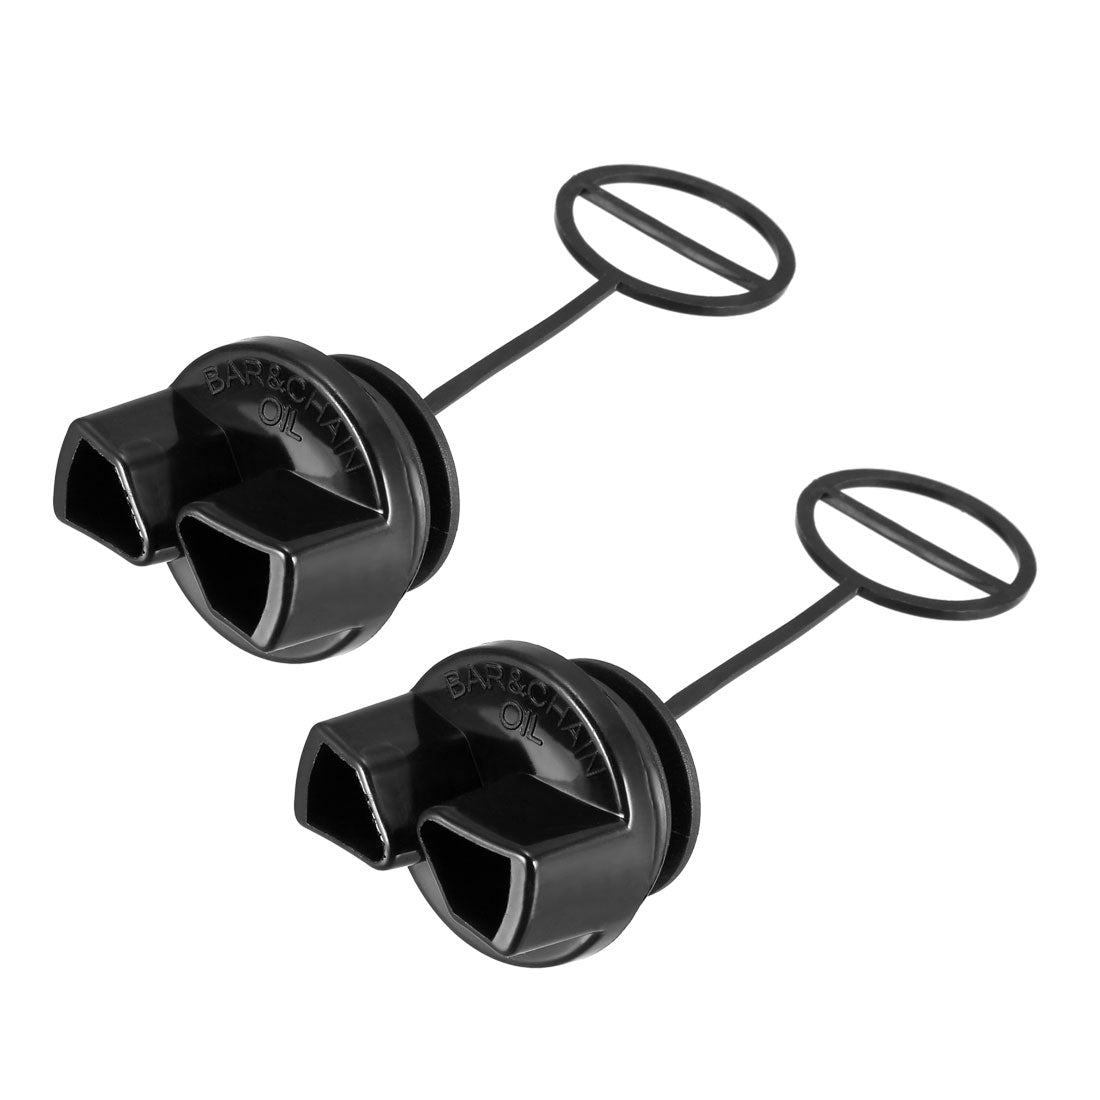 uxcell Uxcell 2pcs Replaces Gas Fuel Cap Assembly Replacement for Chainsaws